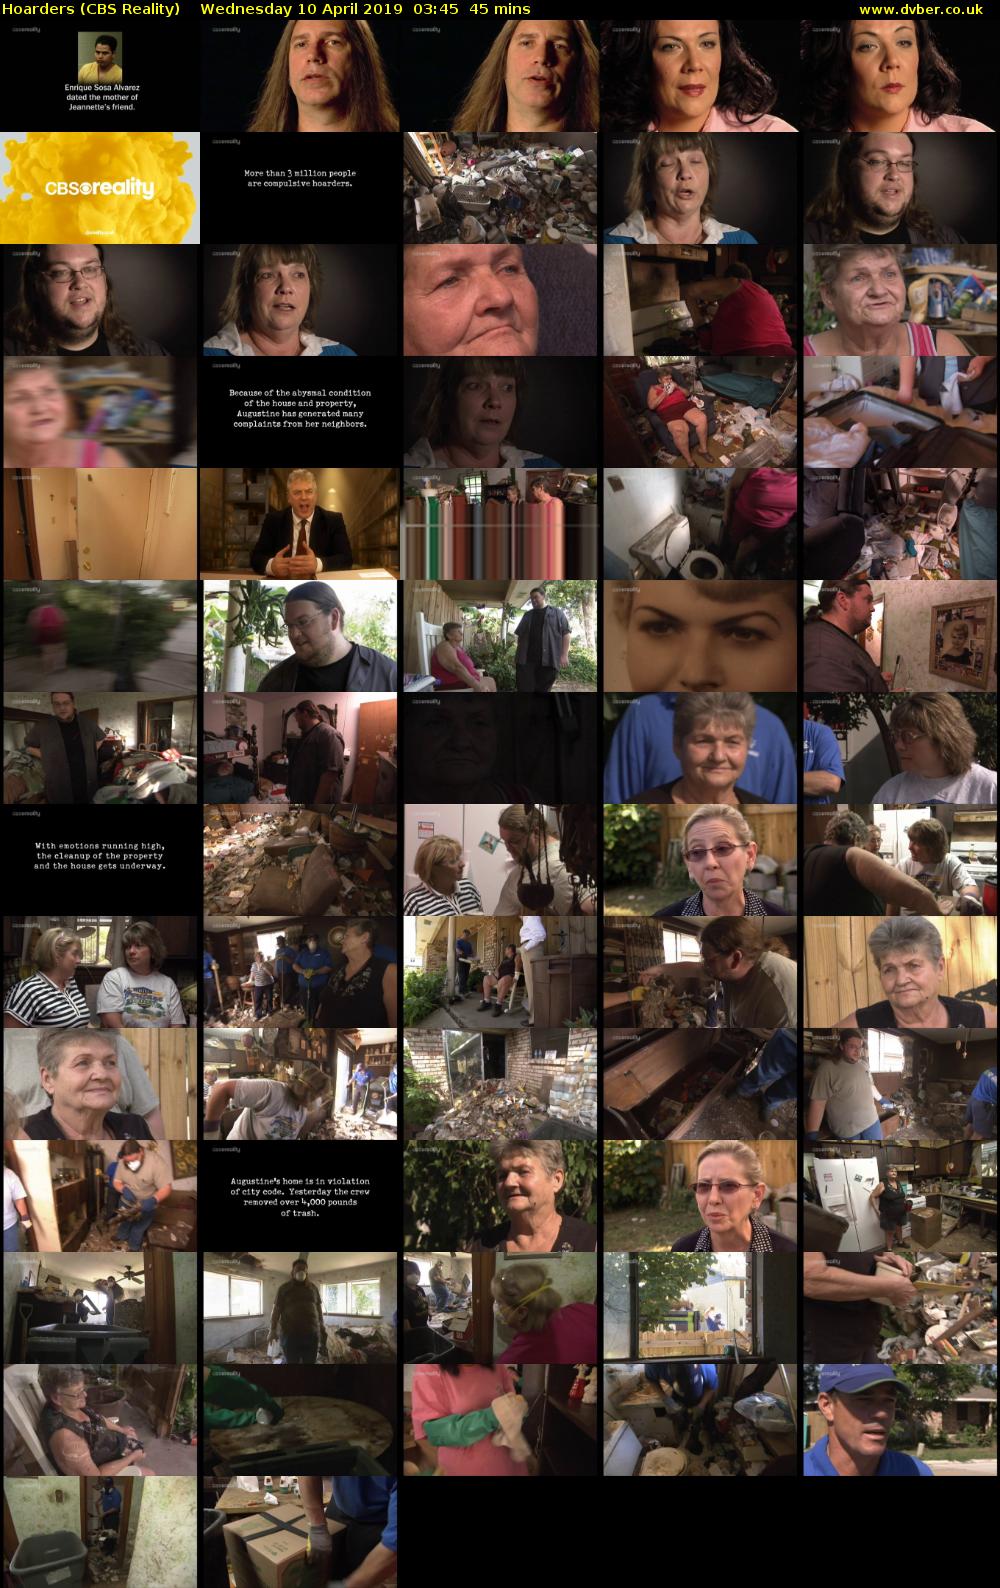 Hoarders (CBS Reality) Wednesday 10 April 2019 03:45 - 04:30